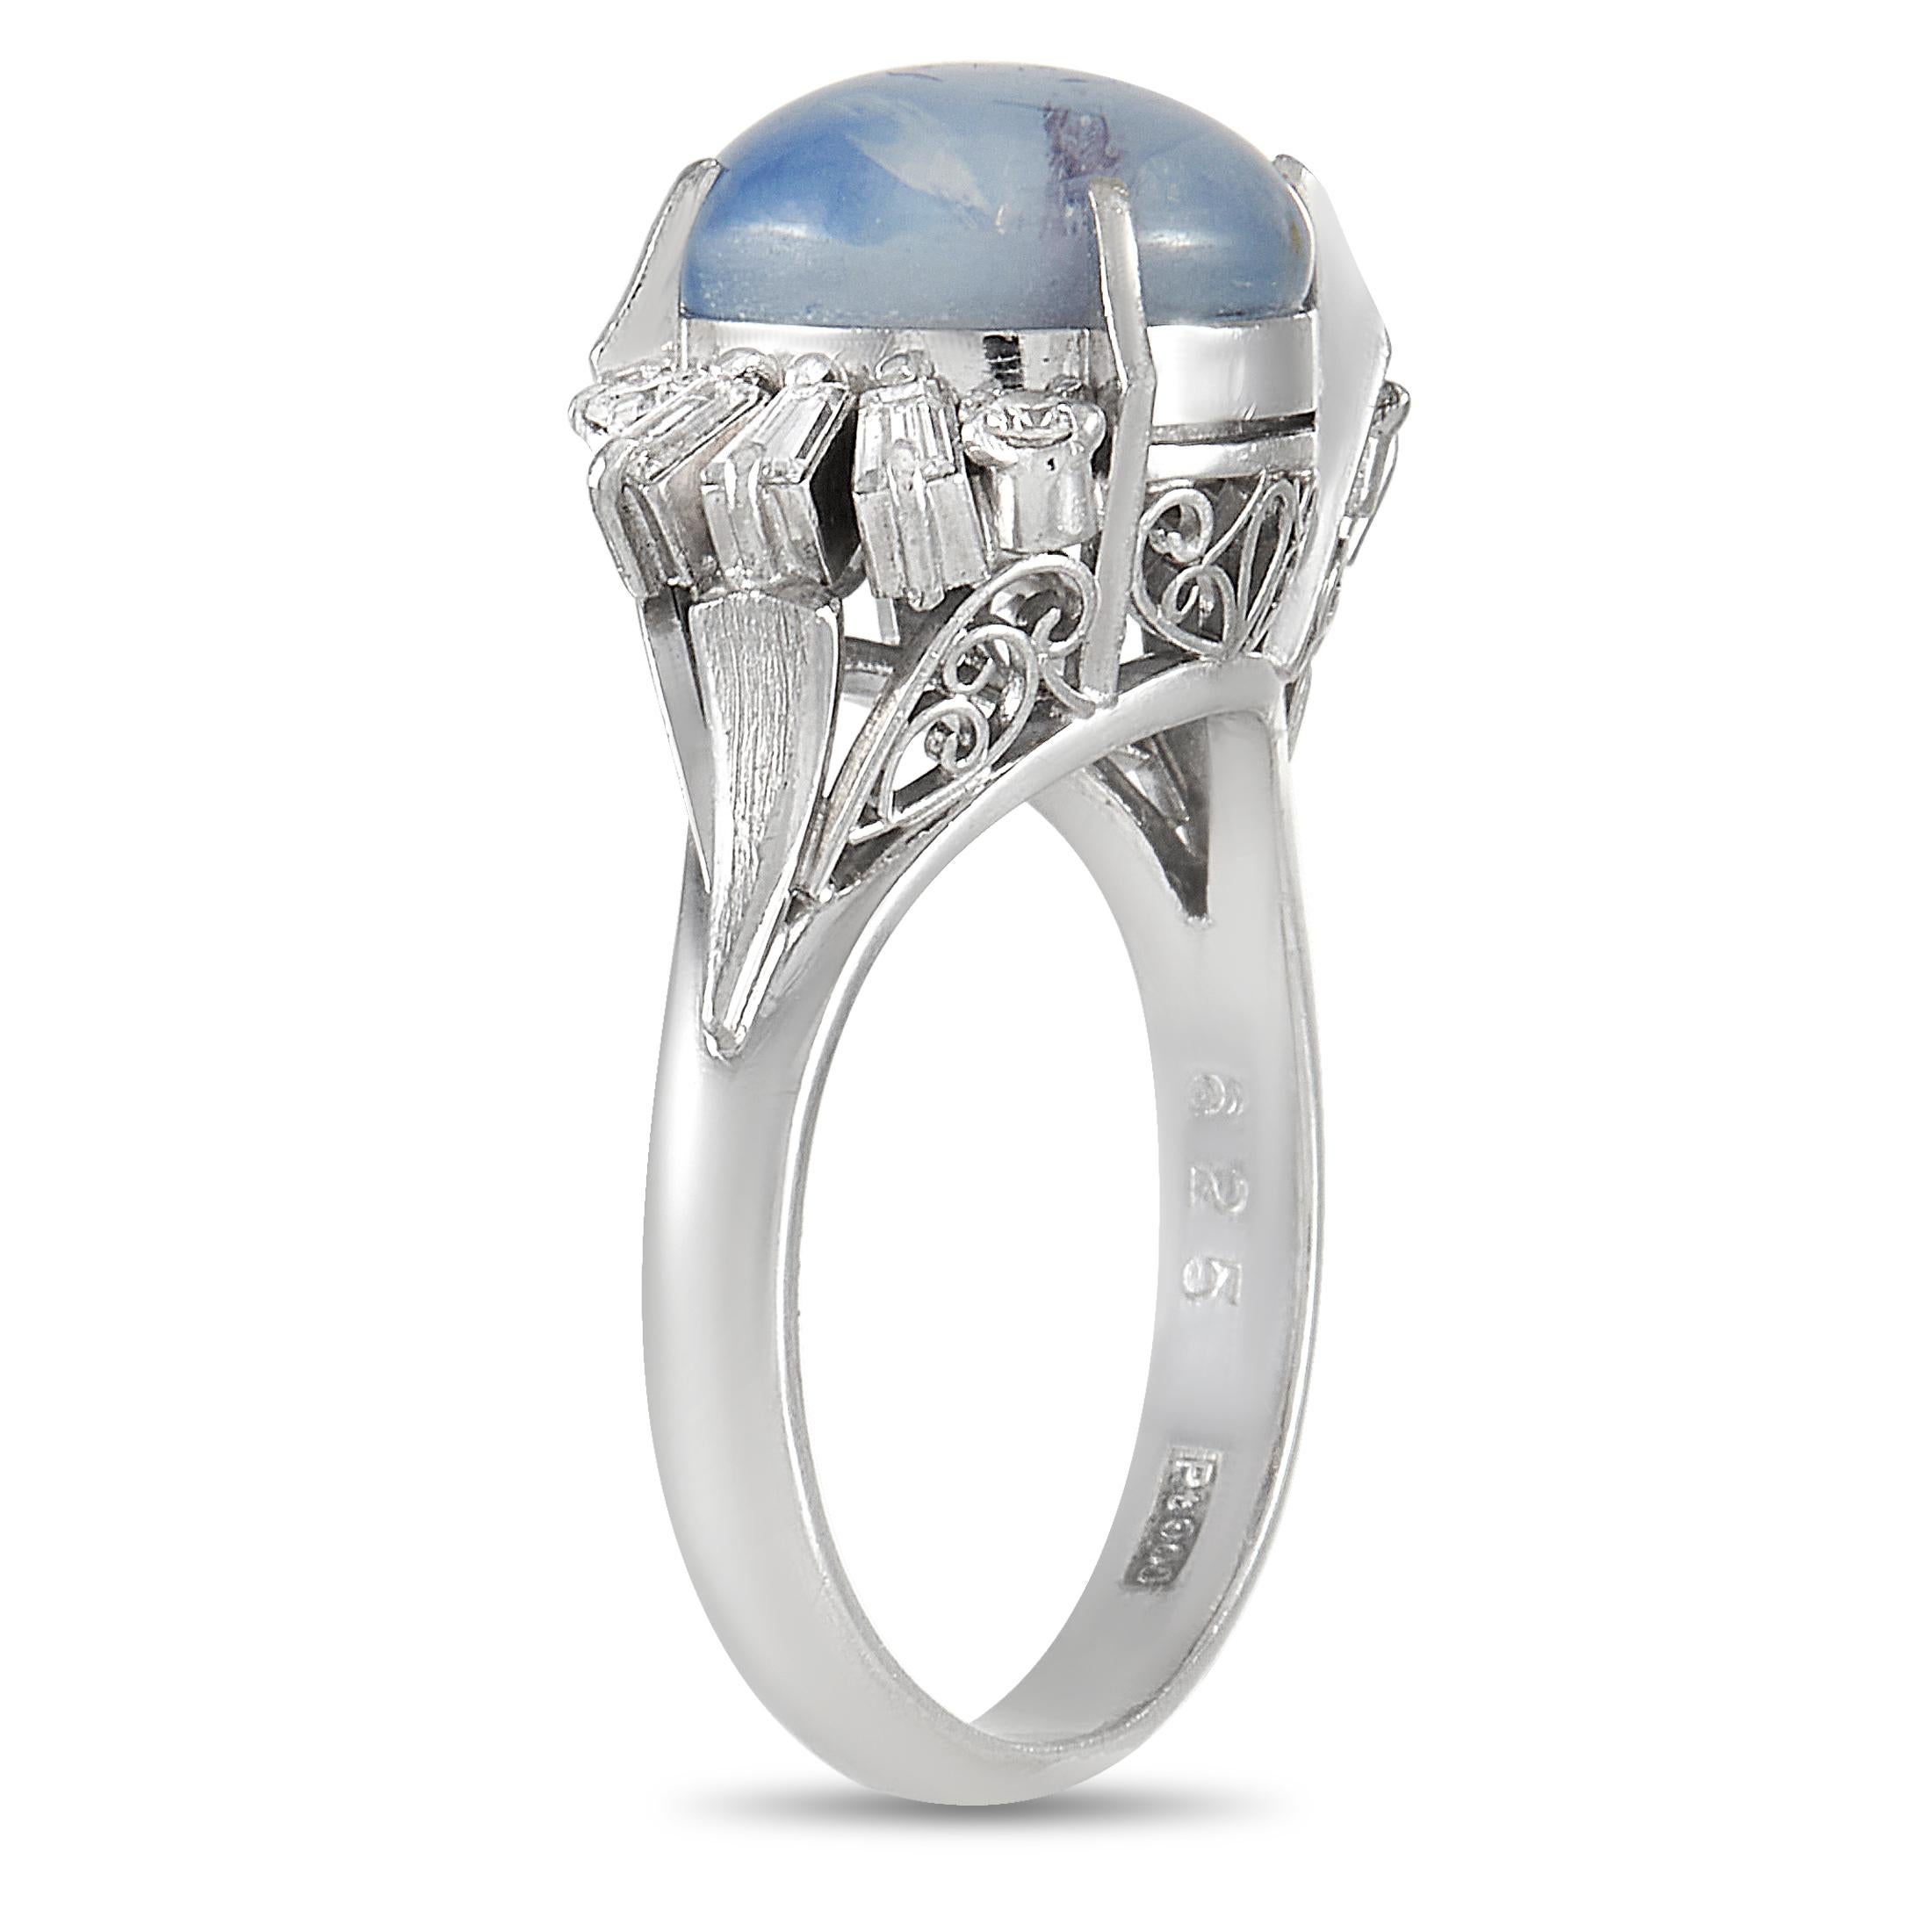 This luxurious ring defies convention in the best way possible. A cloudy 6.25 carat star sapphire center stone adds understated elegance to this enchanting design. An array of diamonds with a total weight of 0.36 carats sparkle and shine from their